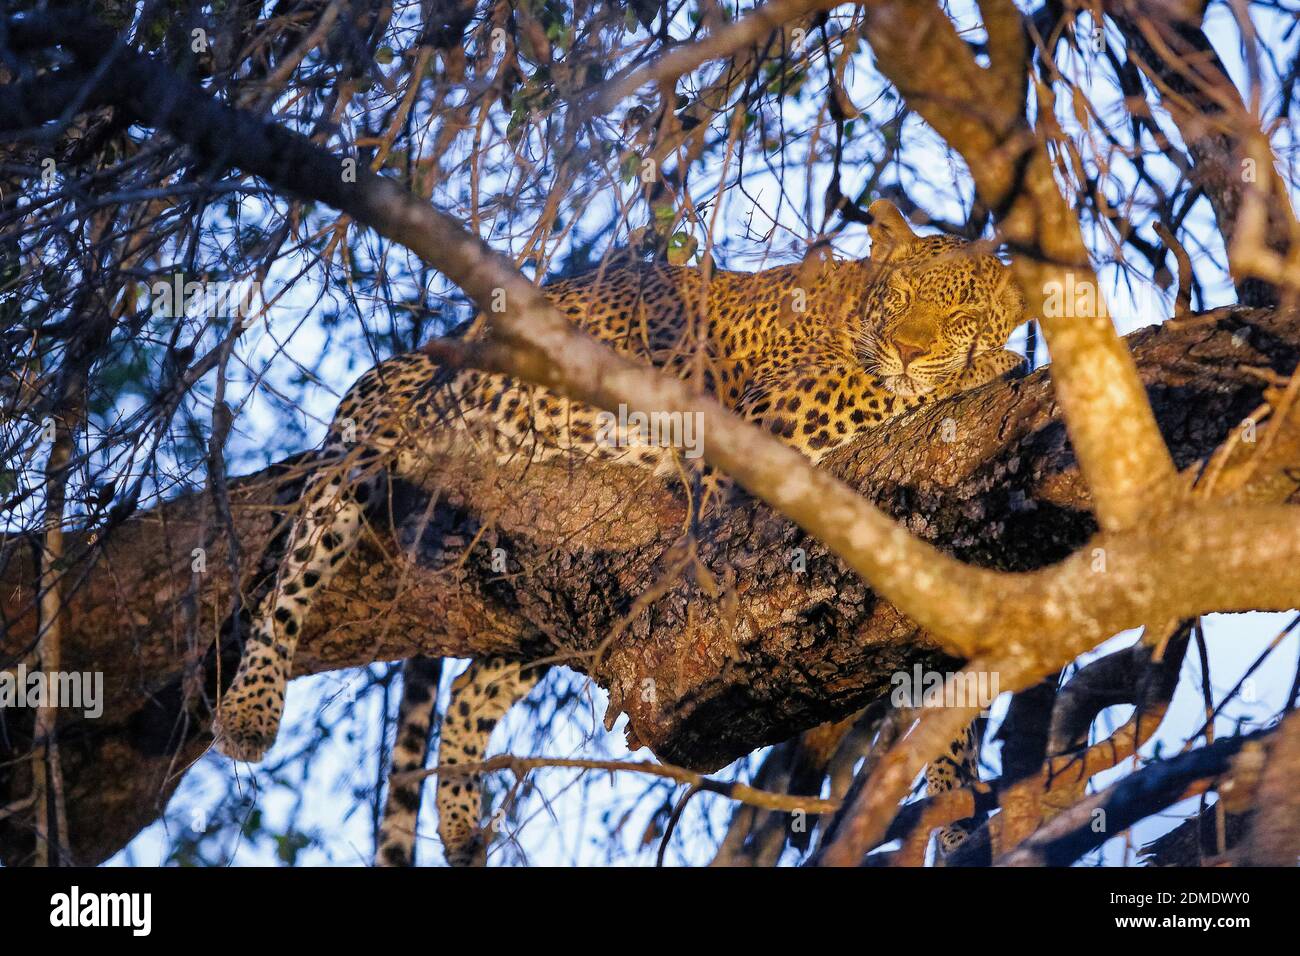 A low angle shot of a cheetah sleeping on the branches of a tree Stock Photo